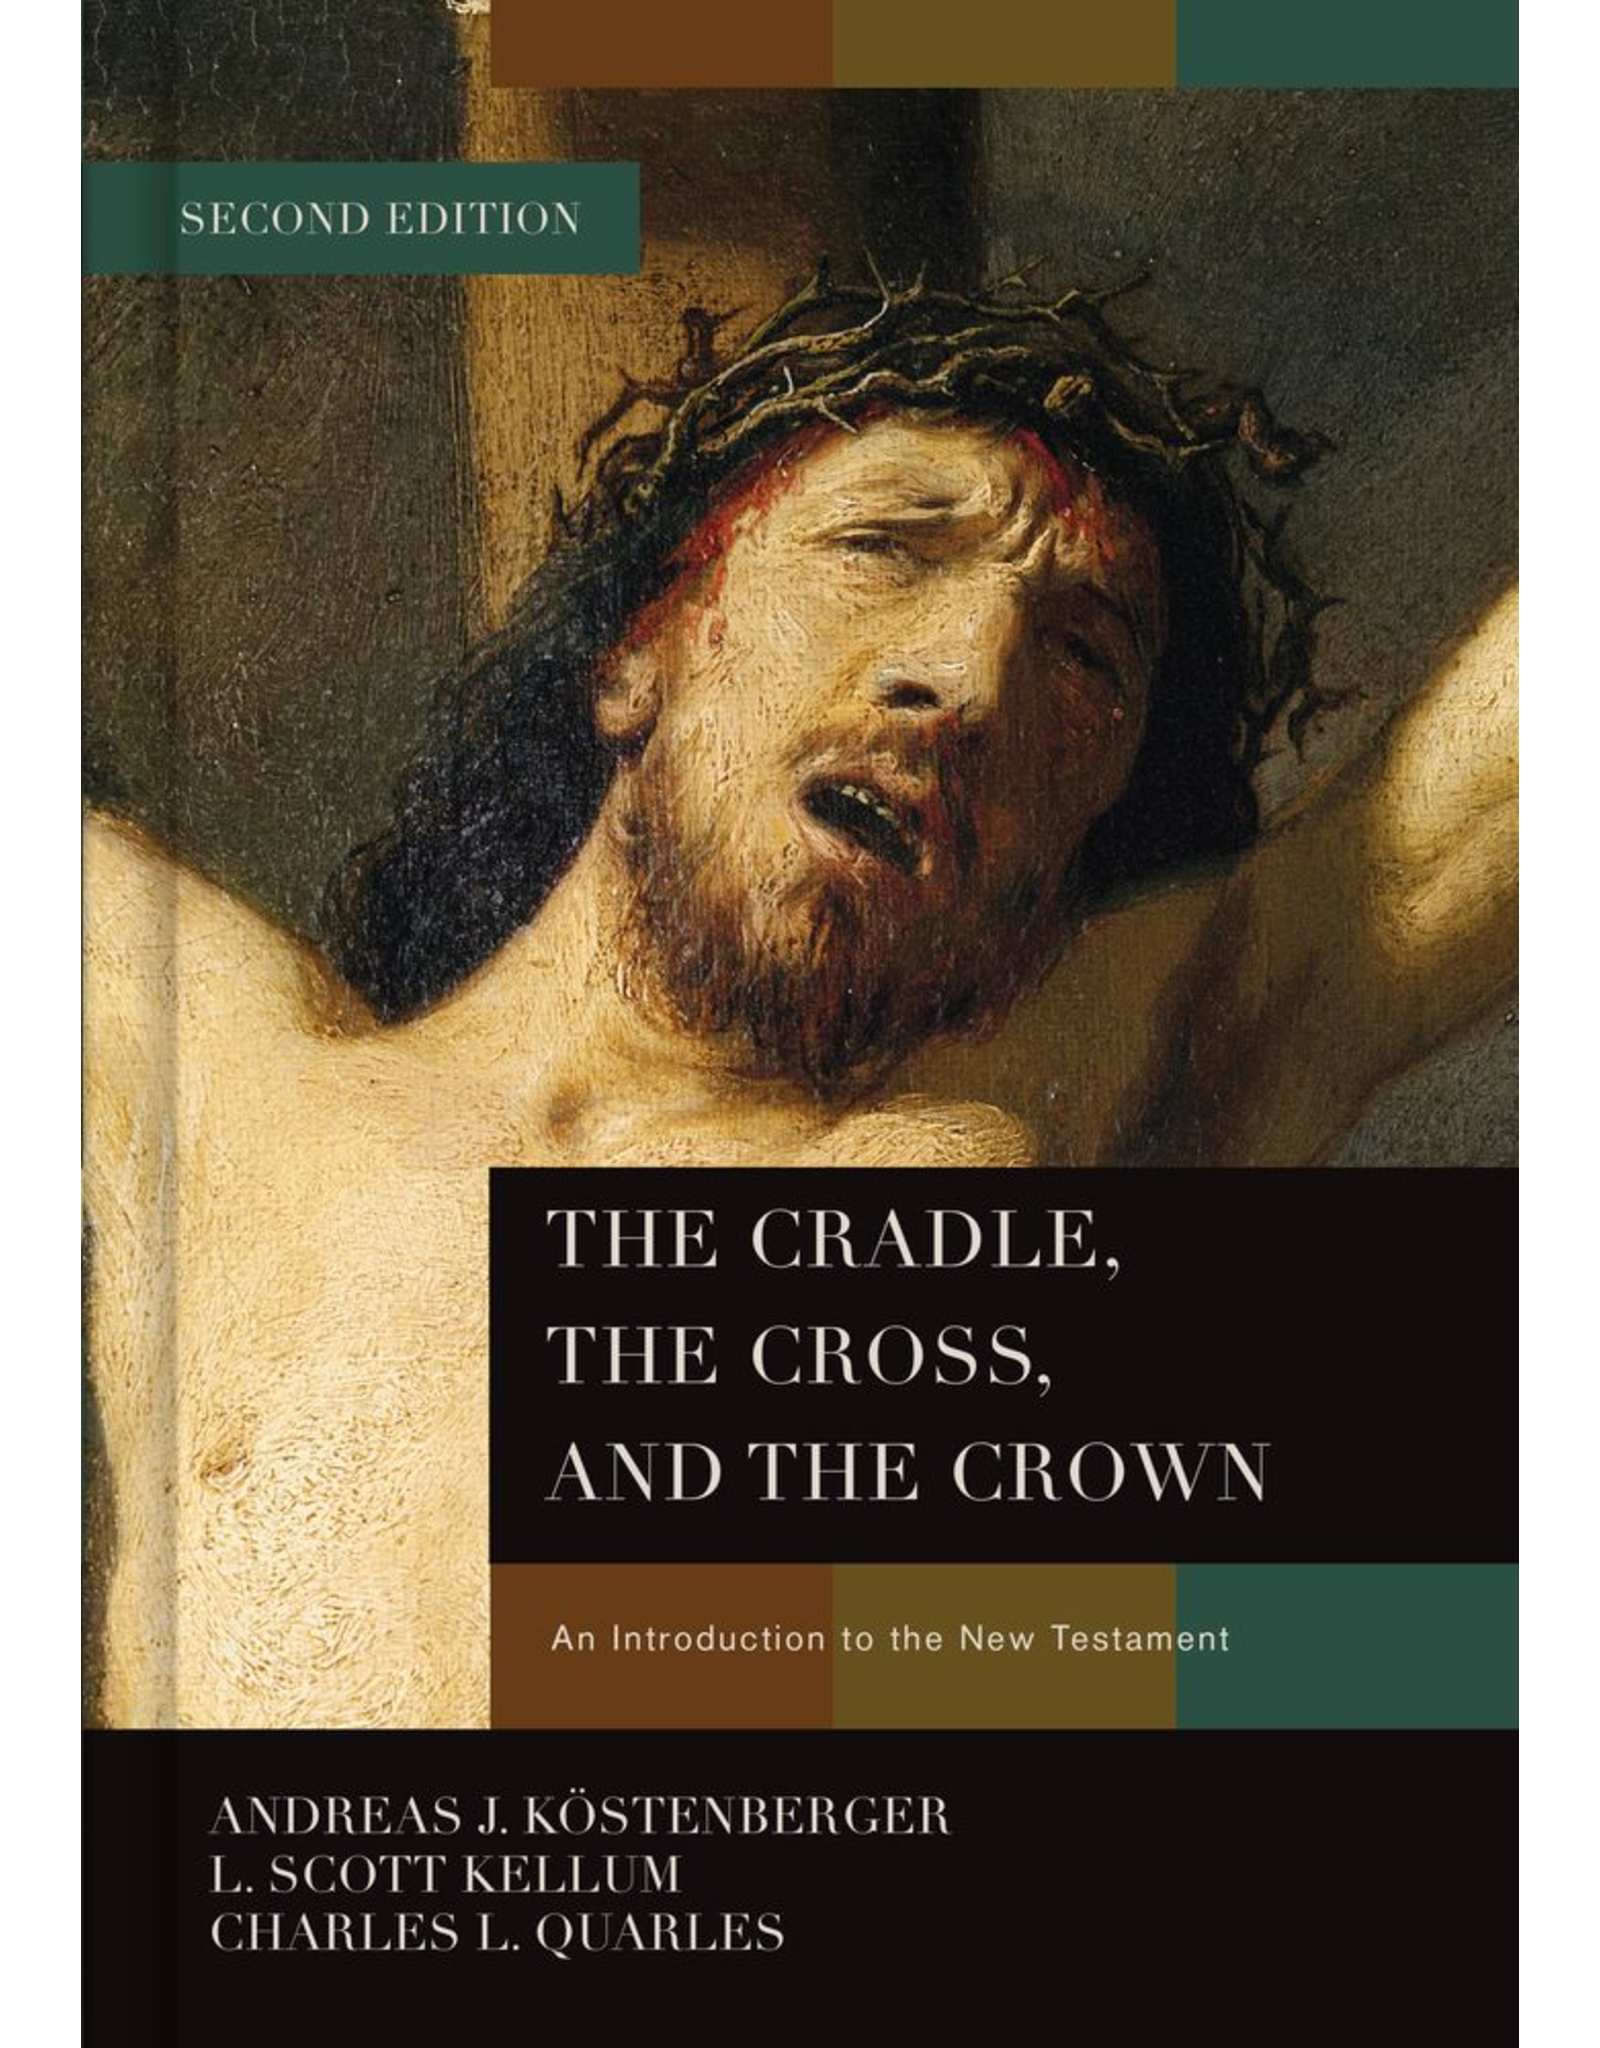 Broadman & Holman Publishers (B&H) The Cradle, The Cross, and the Crown: An Introduction to the New Testament (2nd Ed.)